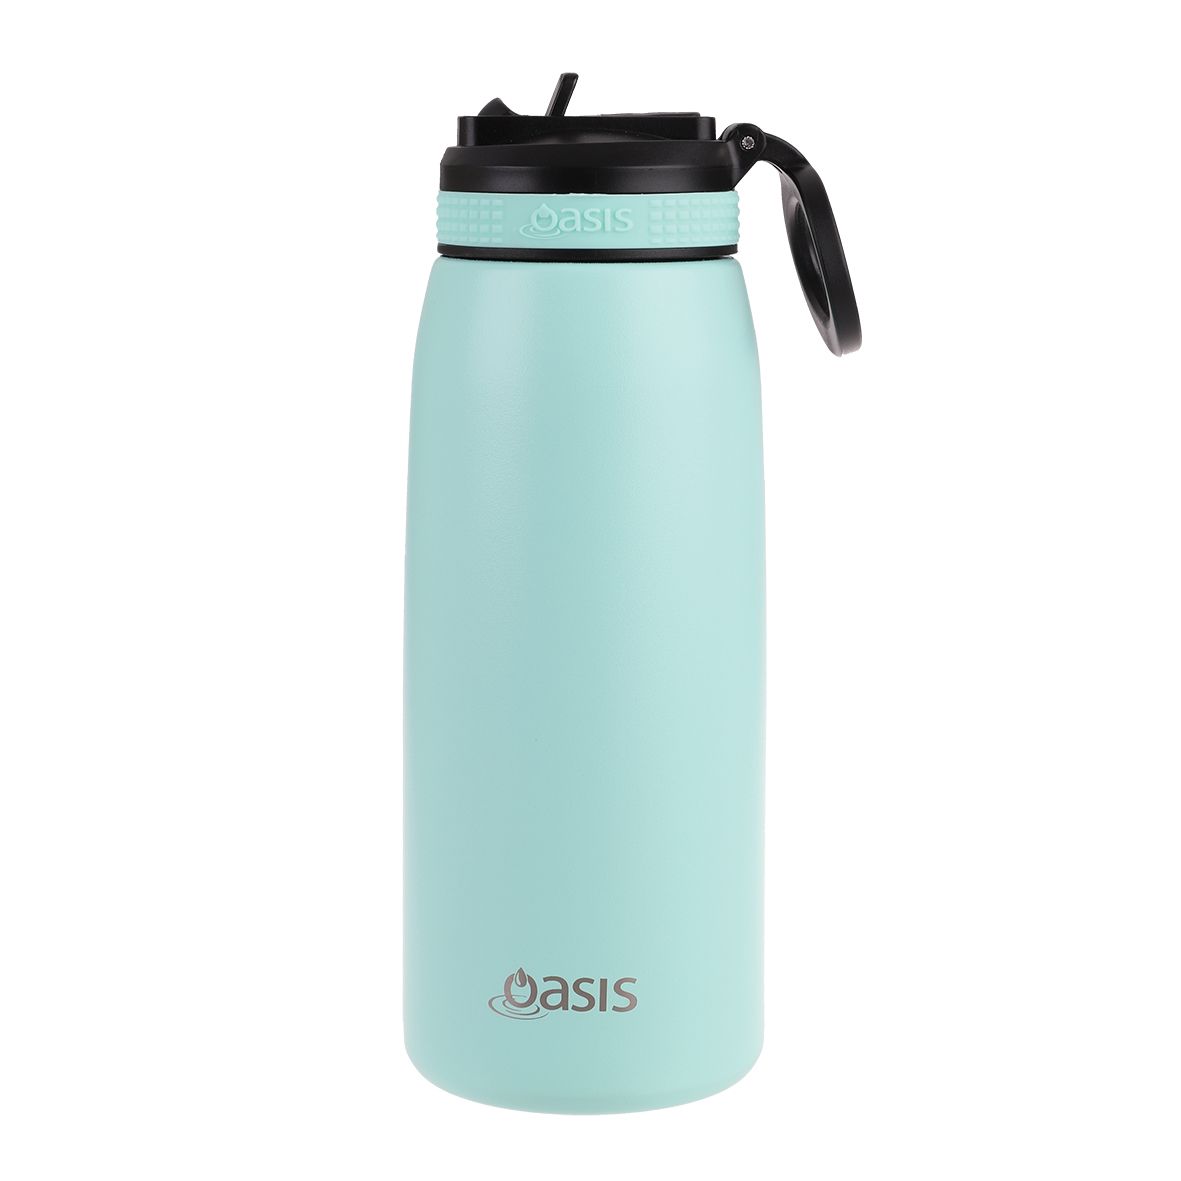 Oasis Thermal Sports Sipper Bottle 780ml